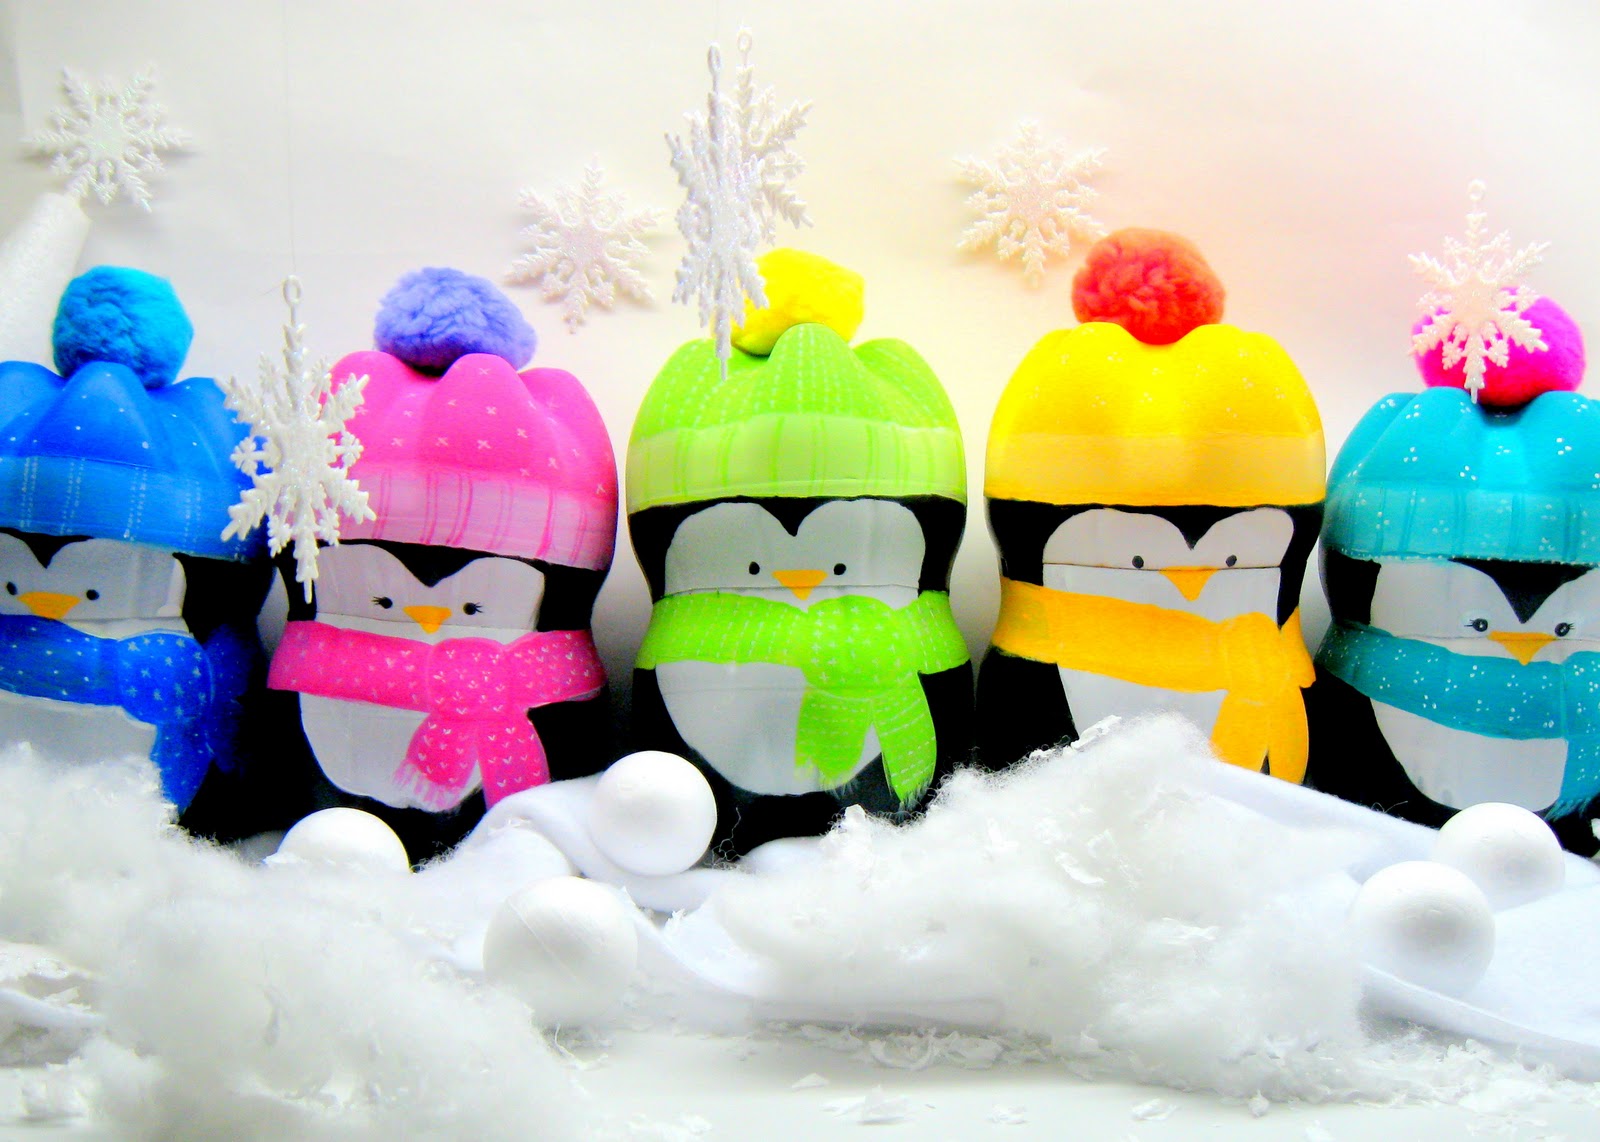 Cute Penguin Christmas Wallpaper Image Pictures Becuo